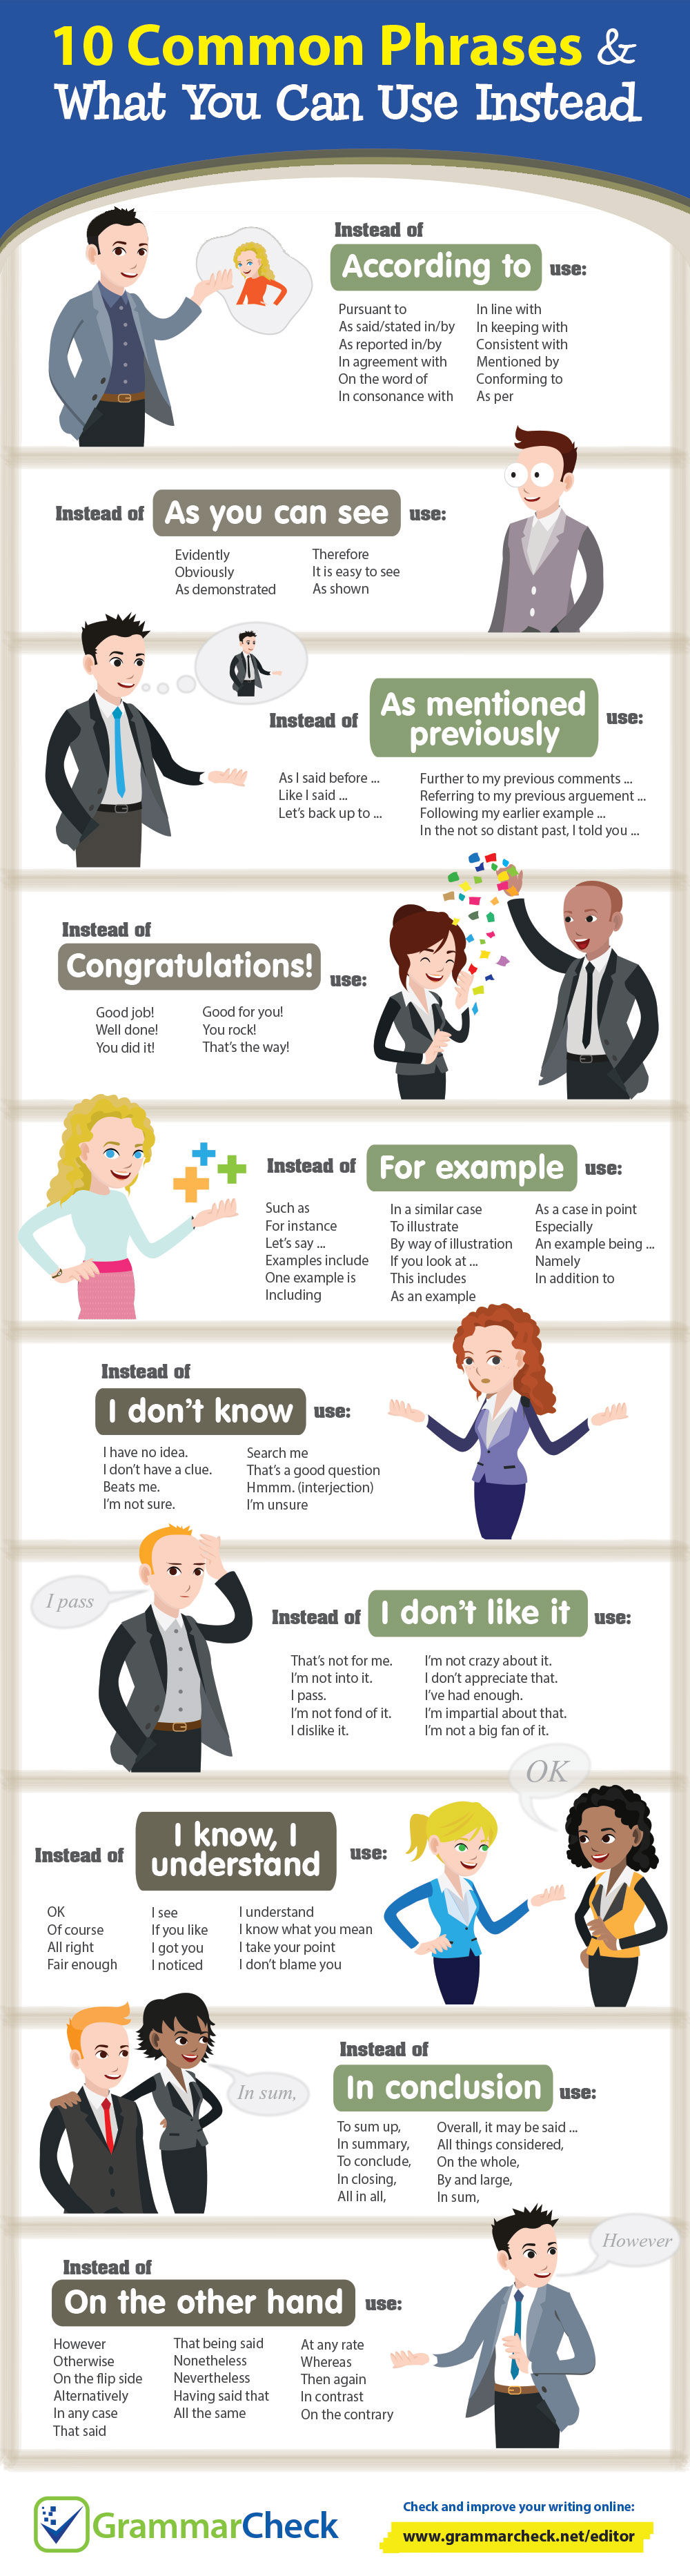 10 Common Phrases & What You Can Use Instead (Infographic)